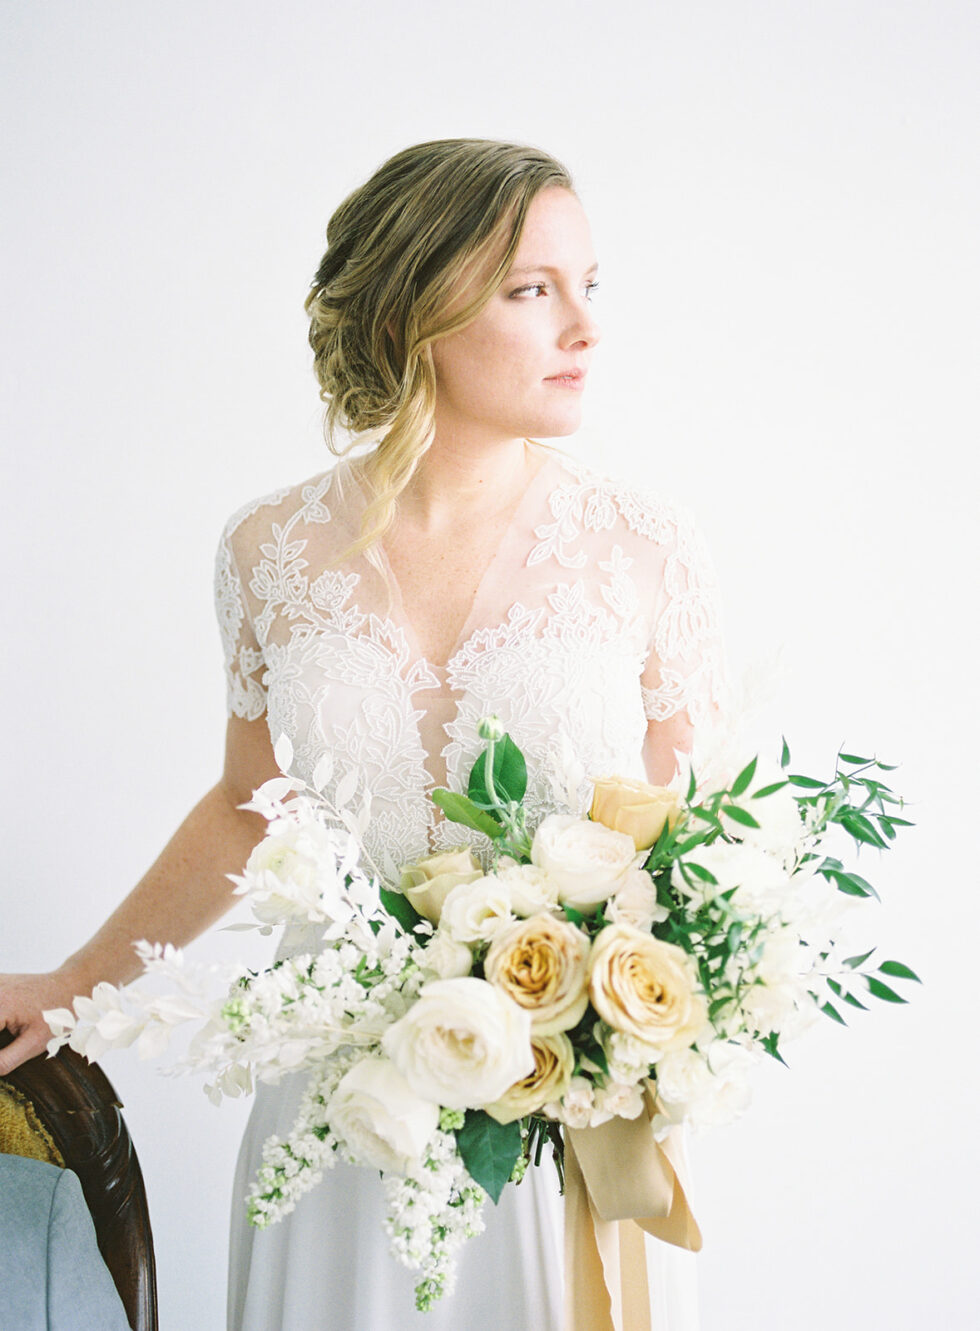 How to Make a Bridal Bouquet - Root Design Company